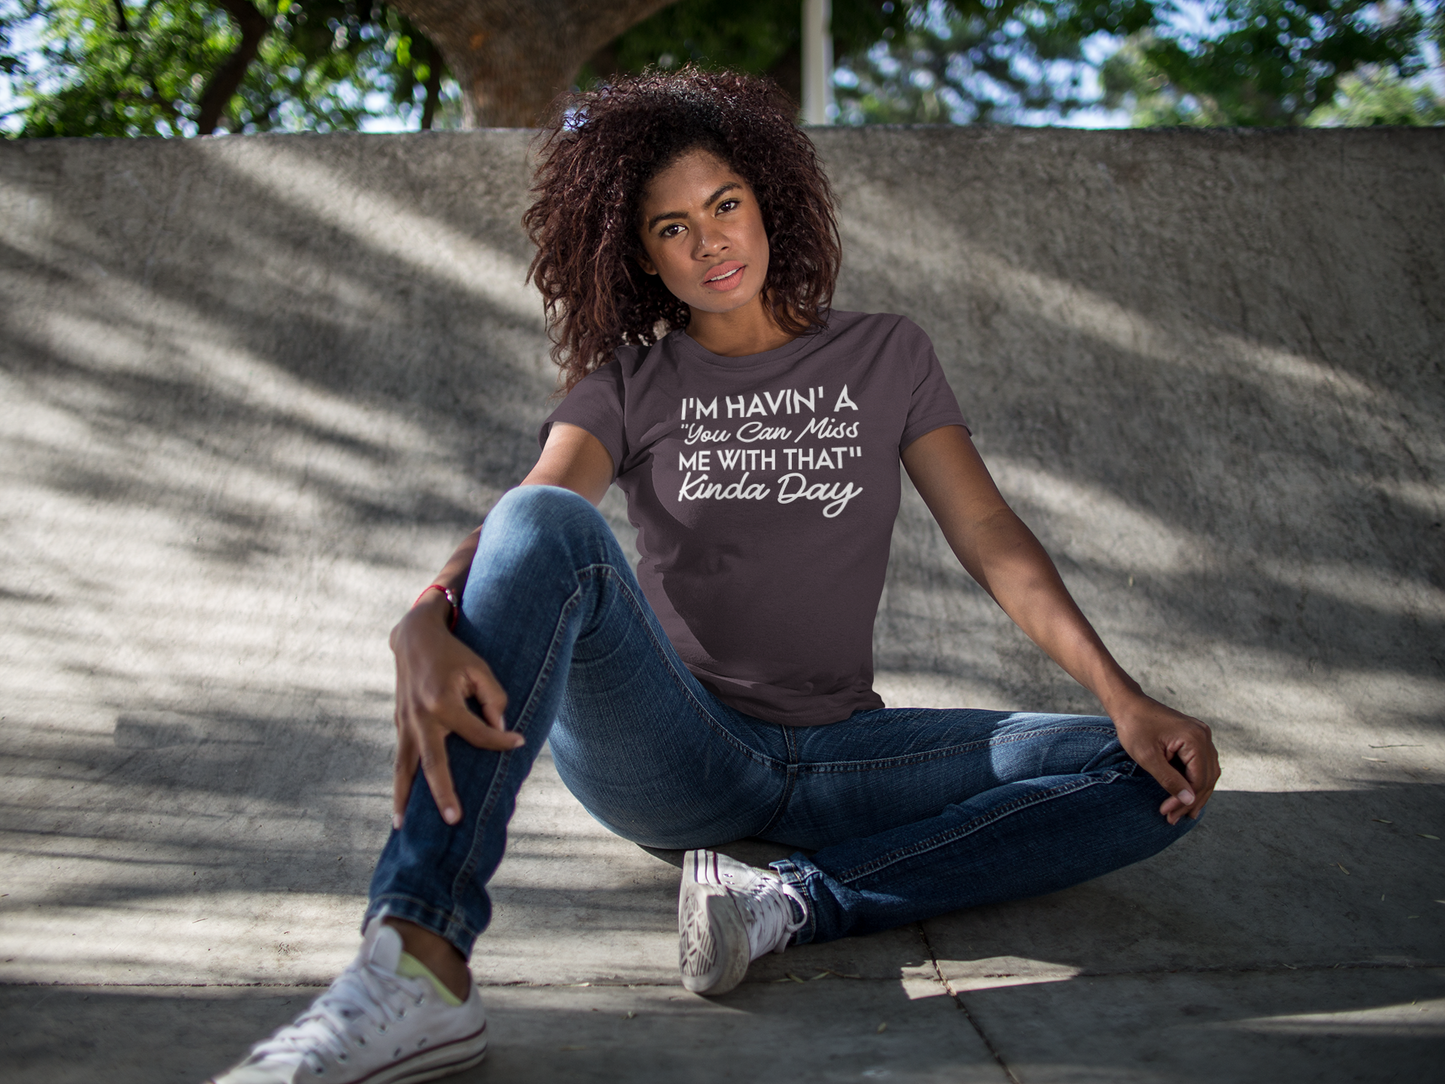 A woman sitting on a skateboard wearing the Sharp Tact Kreativ | Tees & Gifts with Encouraging Messages to Brighten Your Day with a Bit of Wit's "I'm Havin' A "You Can Miss Me With That" Kinda Day Tee" gray t-shirt.